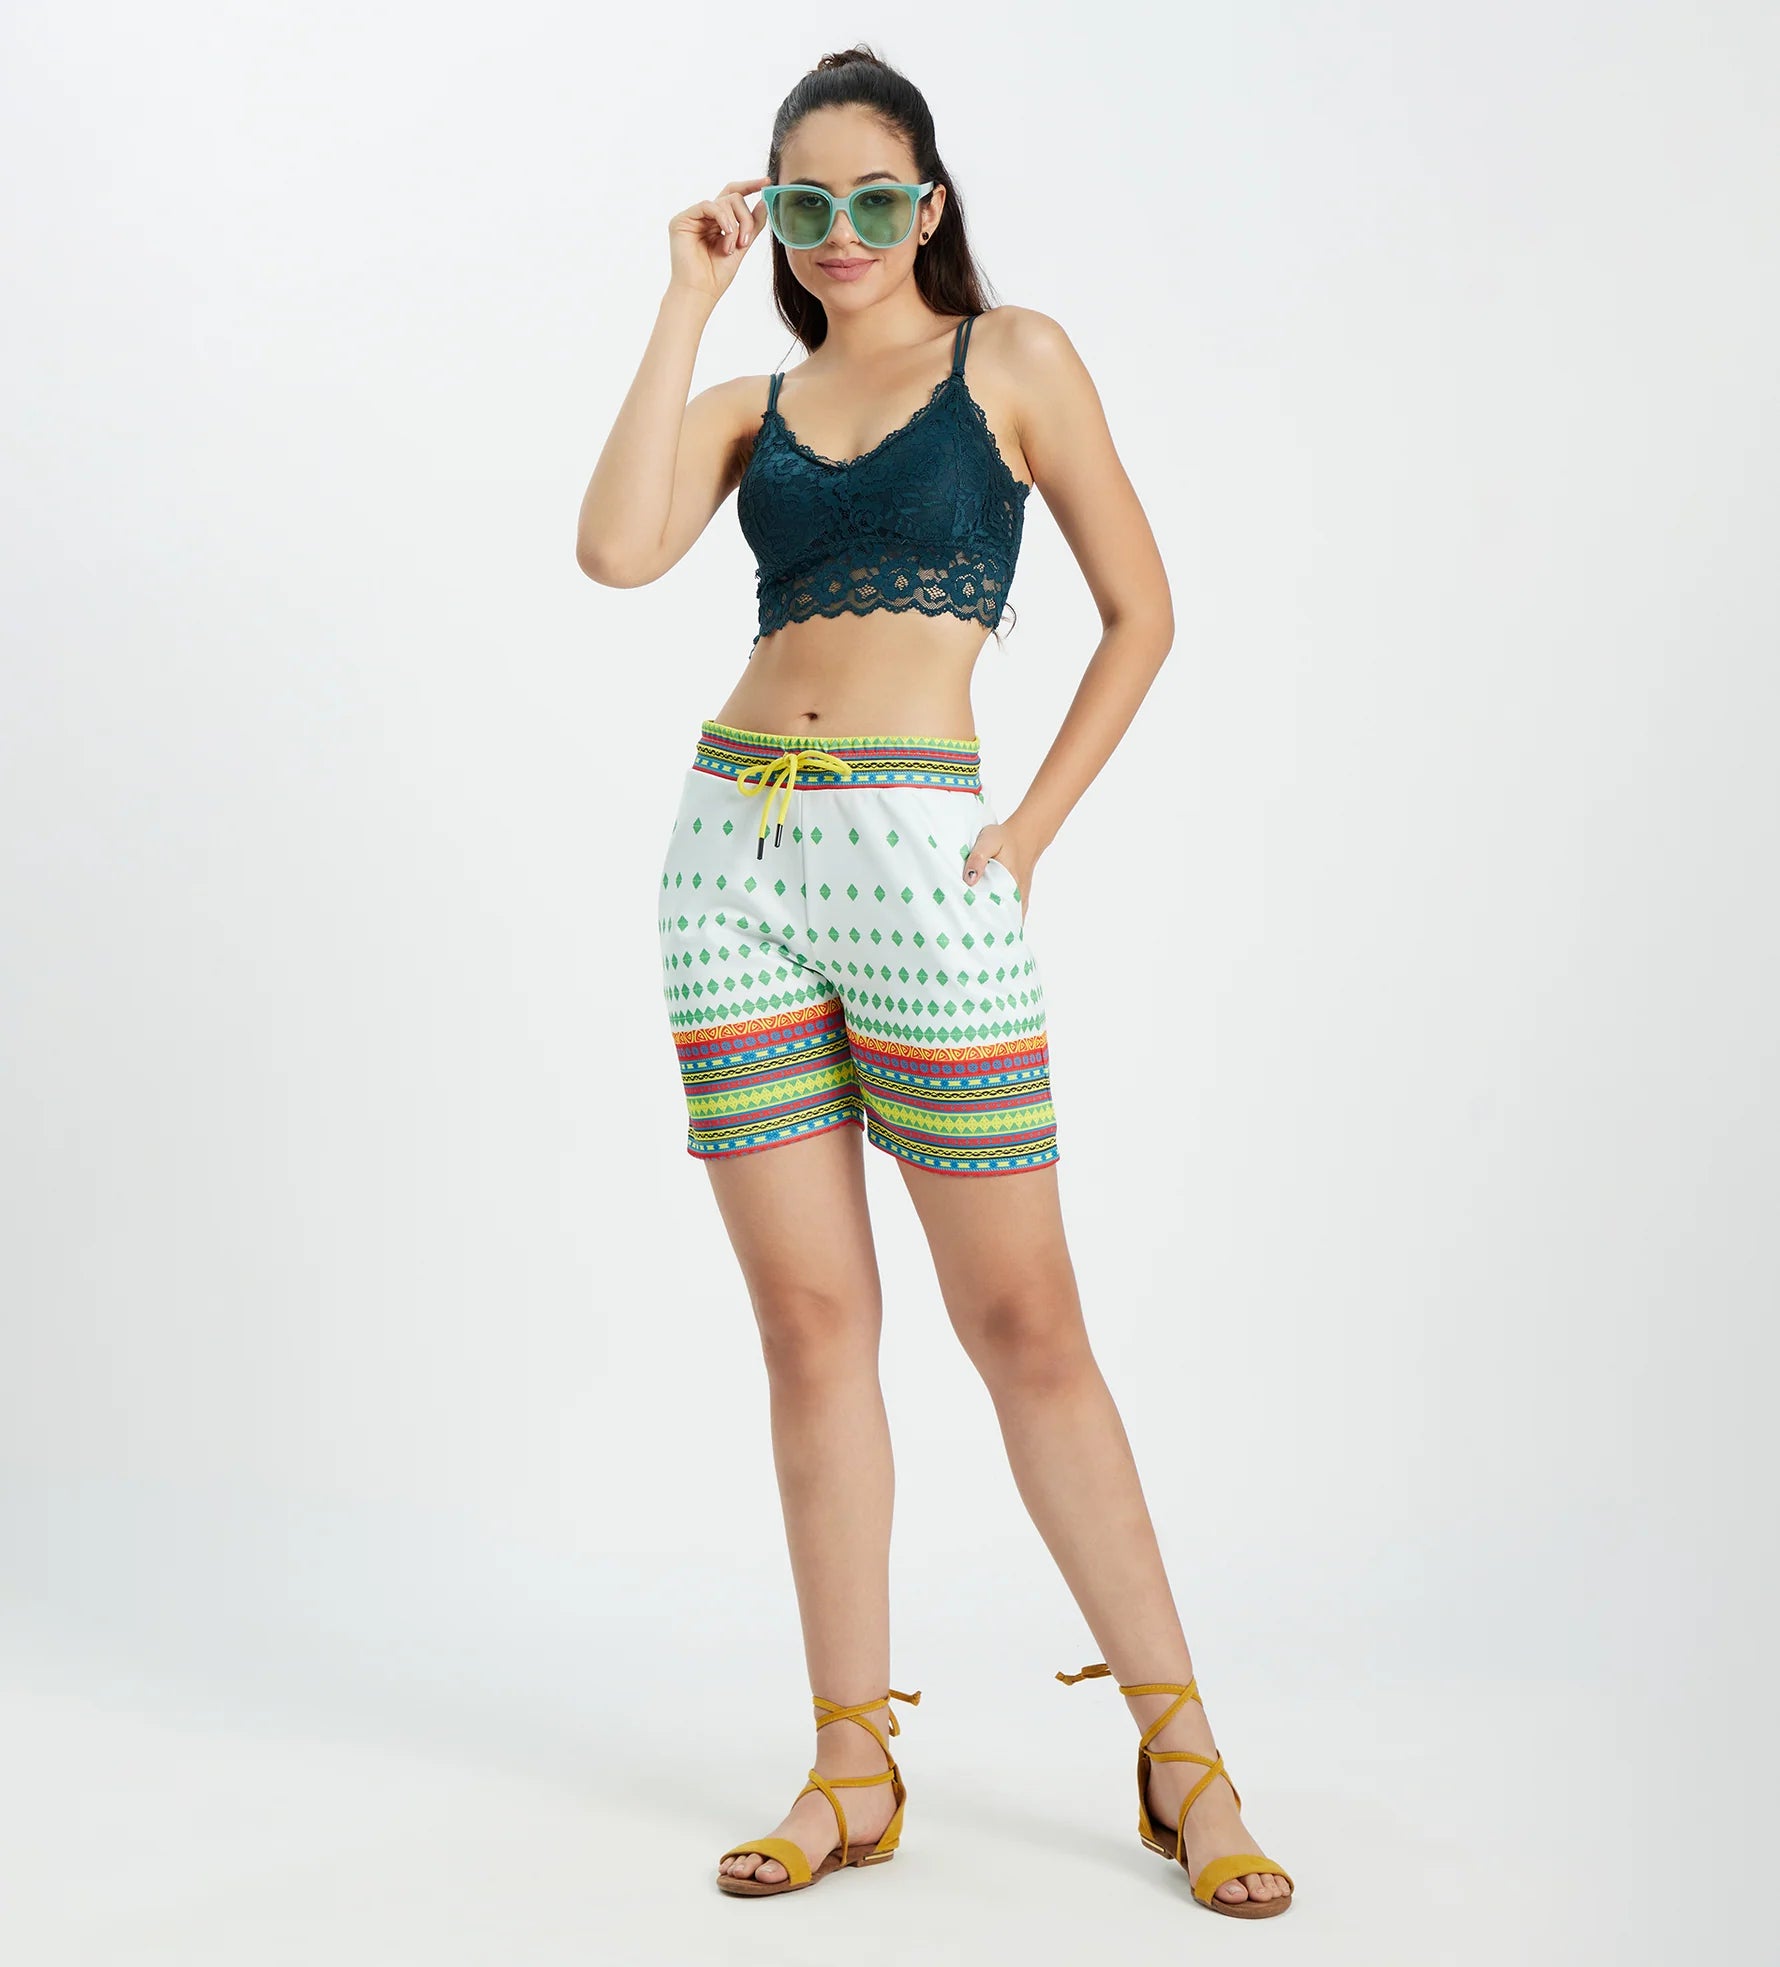 Discover 12 Types of Shorts for Women and Girls | Trendy Hot Pants of 2023